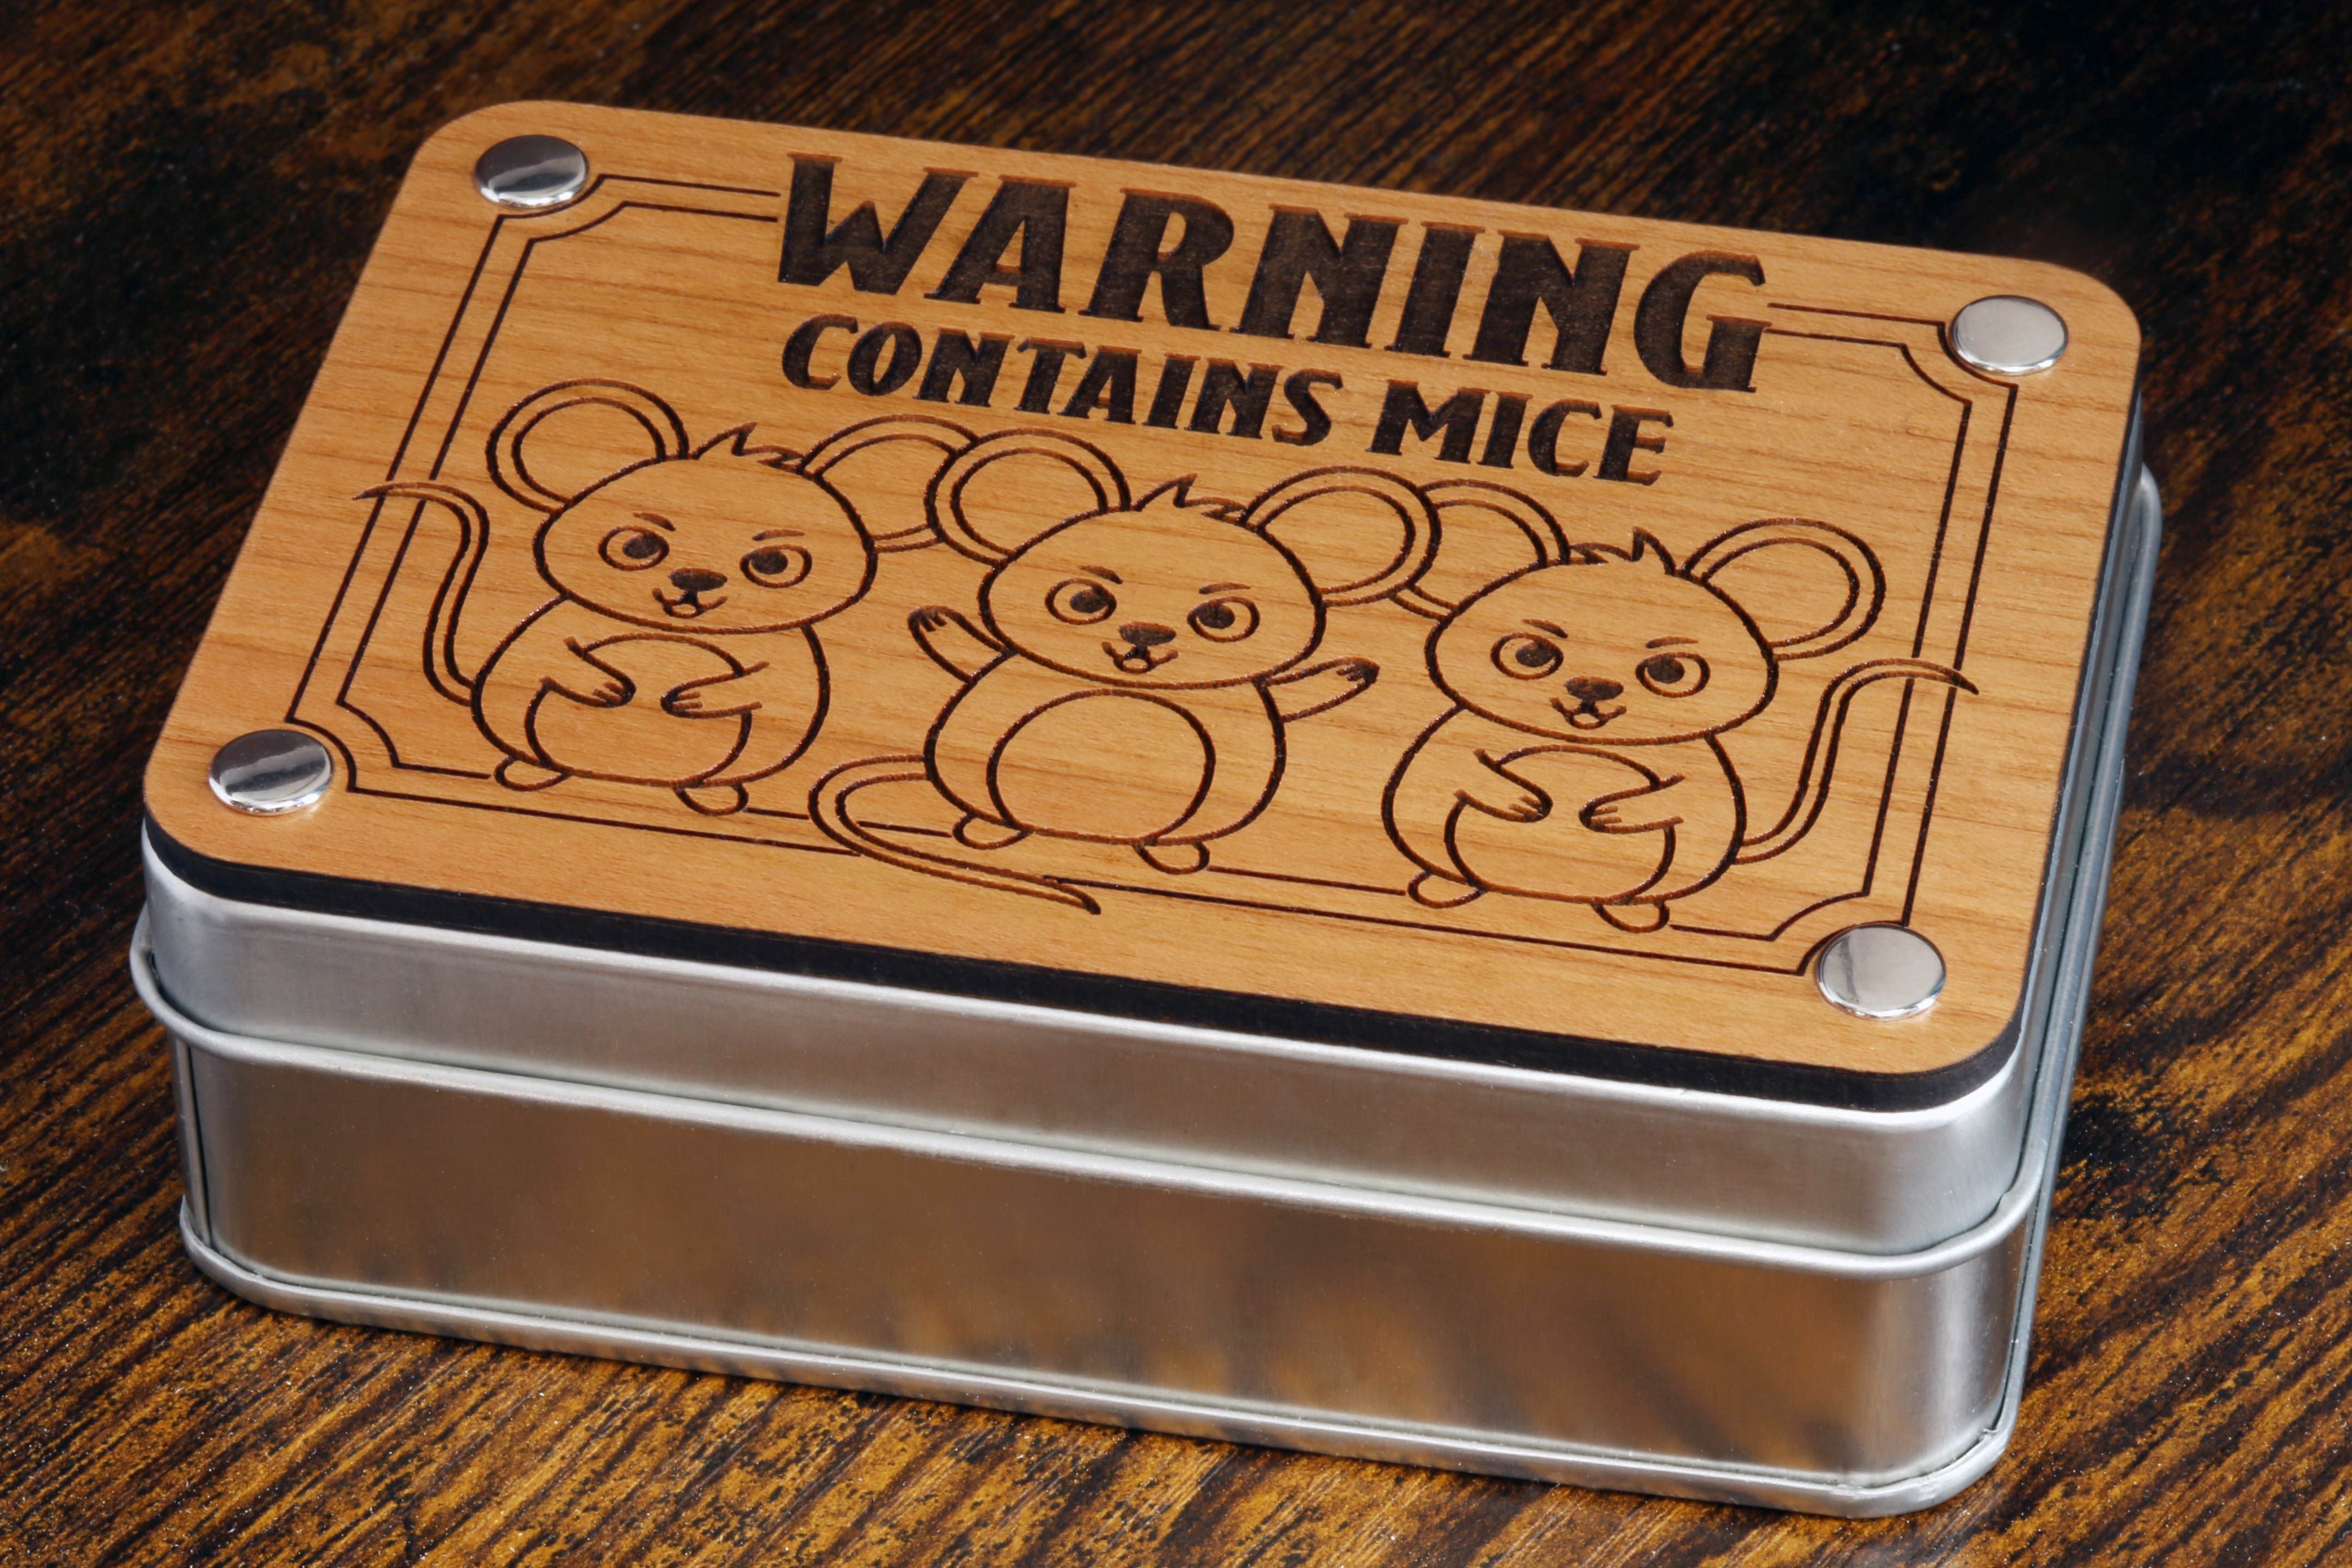 Warning ! Contains mice dice set with metal box